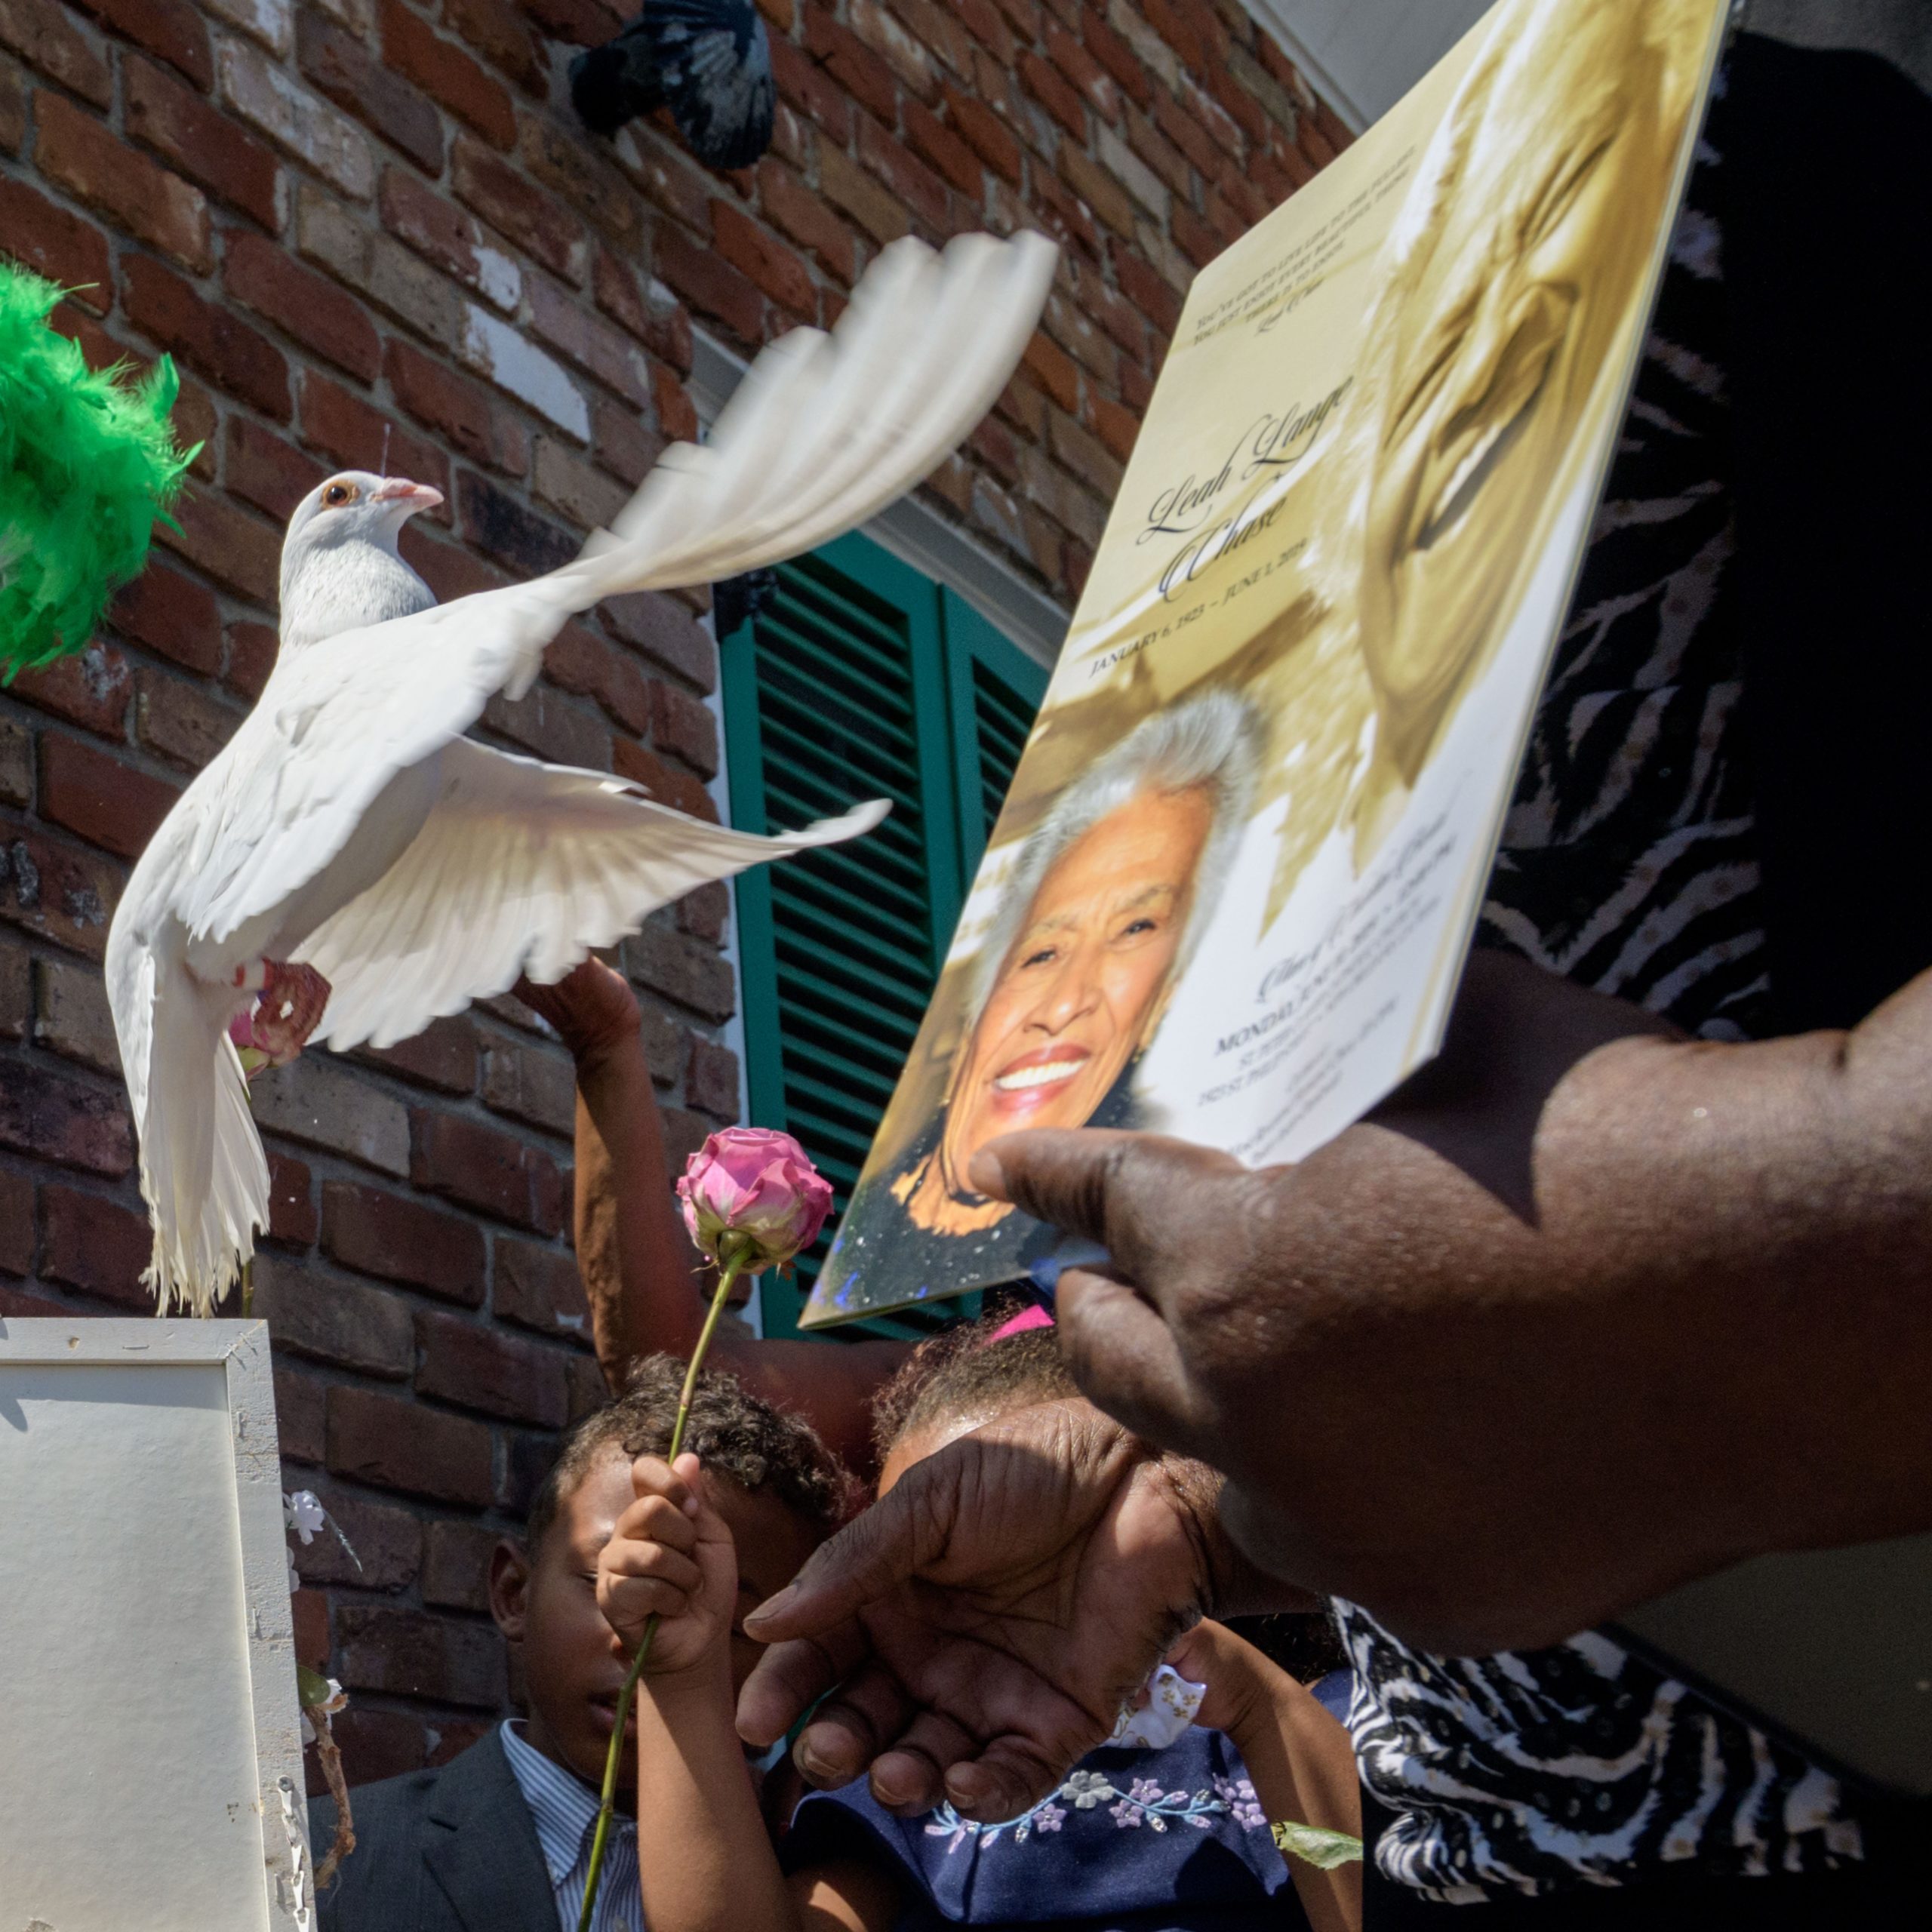 Clarence Dalcour, Chief of the Creole Oceolas Mardi Gras Indians, releases doves at Dooky Chase's Restaurant in remembrance of Chef Leah Chase as family members of Chase look on after a funeral mass in the Treme neighborhood in New Orleans, La. Monday, June 10, 2019. The Queen of Creole Cuisine at Dooky Chase's Restaurant passed away last Saturday June 1st at the age of 96. Born on January 6, 1923 she later served two U.S. presidents and also Freedom Riders during the Civil Rights era.  The restaurant she ran with her husband, Dooky Chase, Jr., served as a meeting place for African-American politicians for decades.  Photo by Matthew Hinton